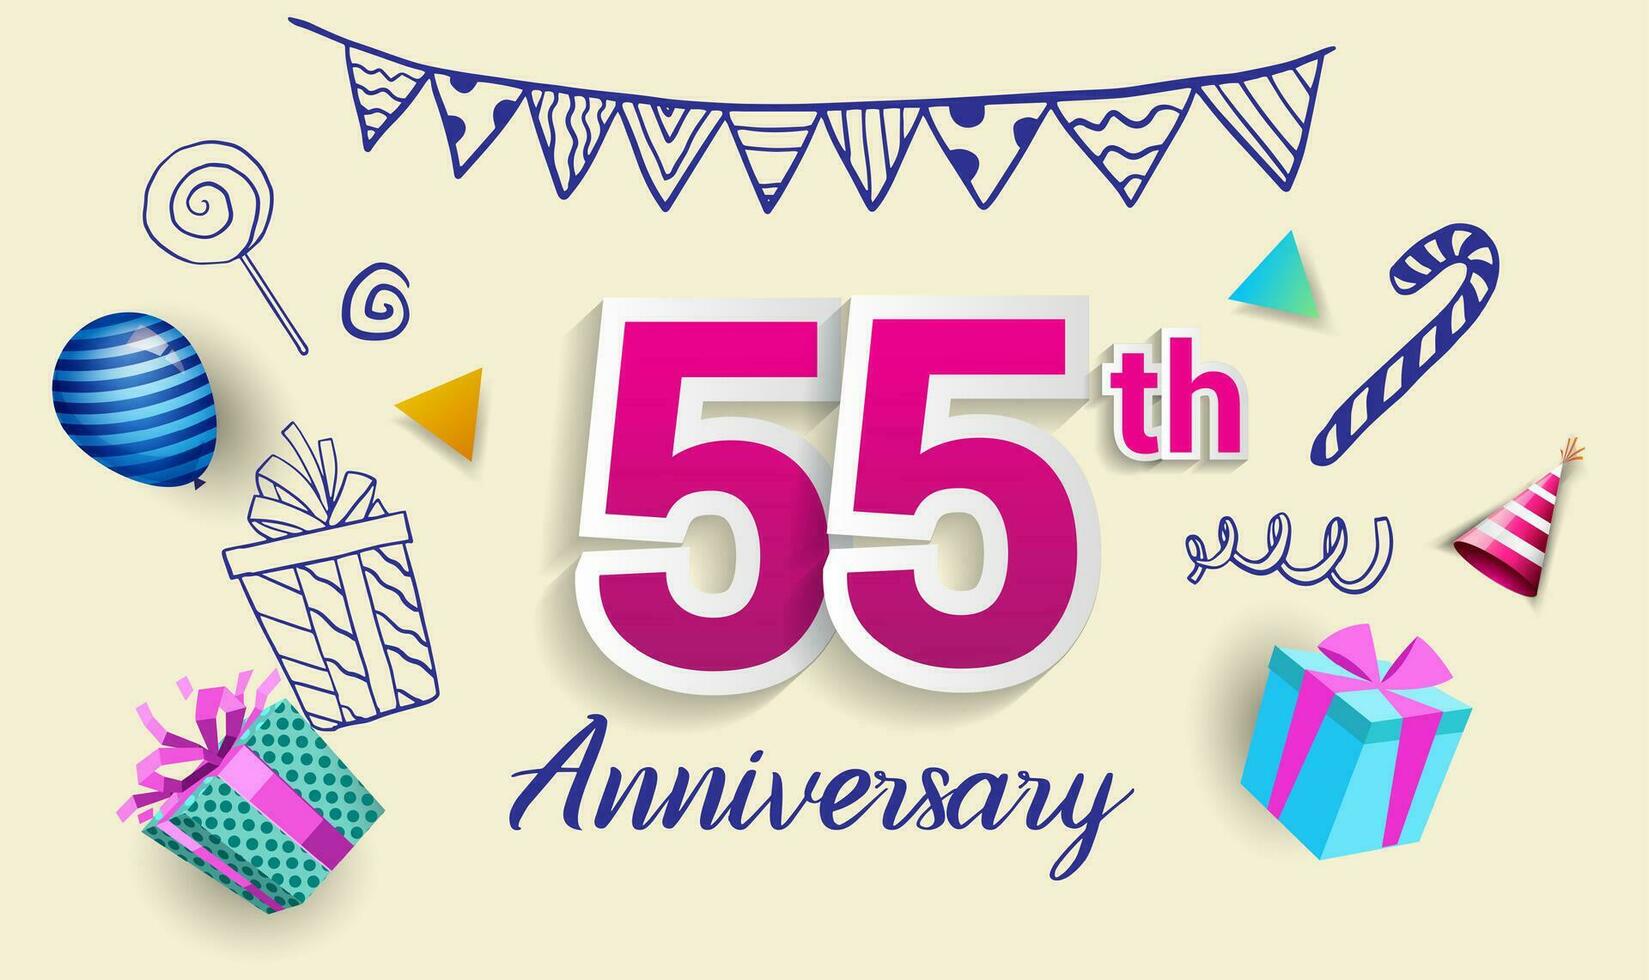 55th Years Anniversary Celebration Design, with gift box and balloons, ribbon, Colorful Vector template elements for your birthday celebrating party.